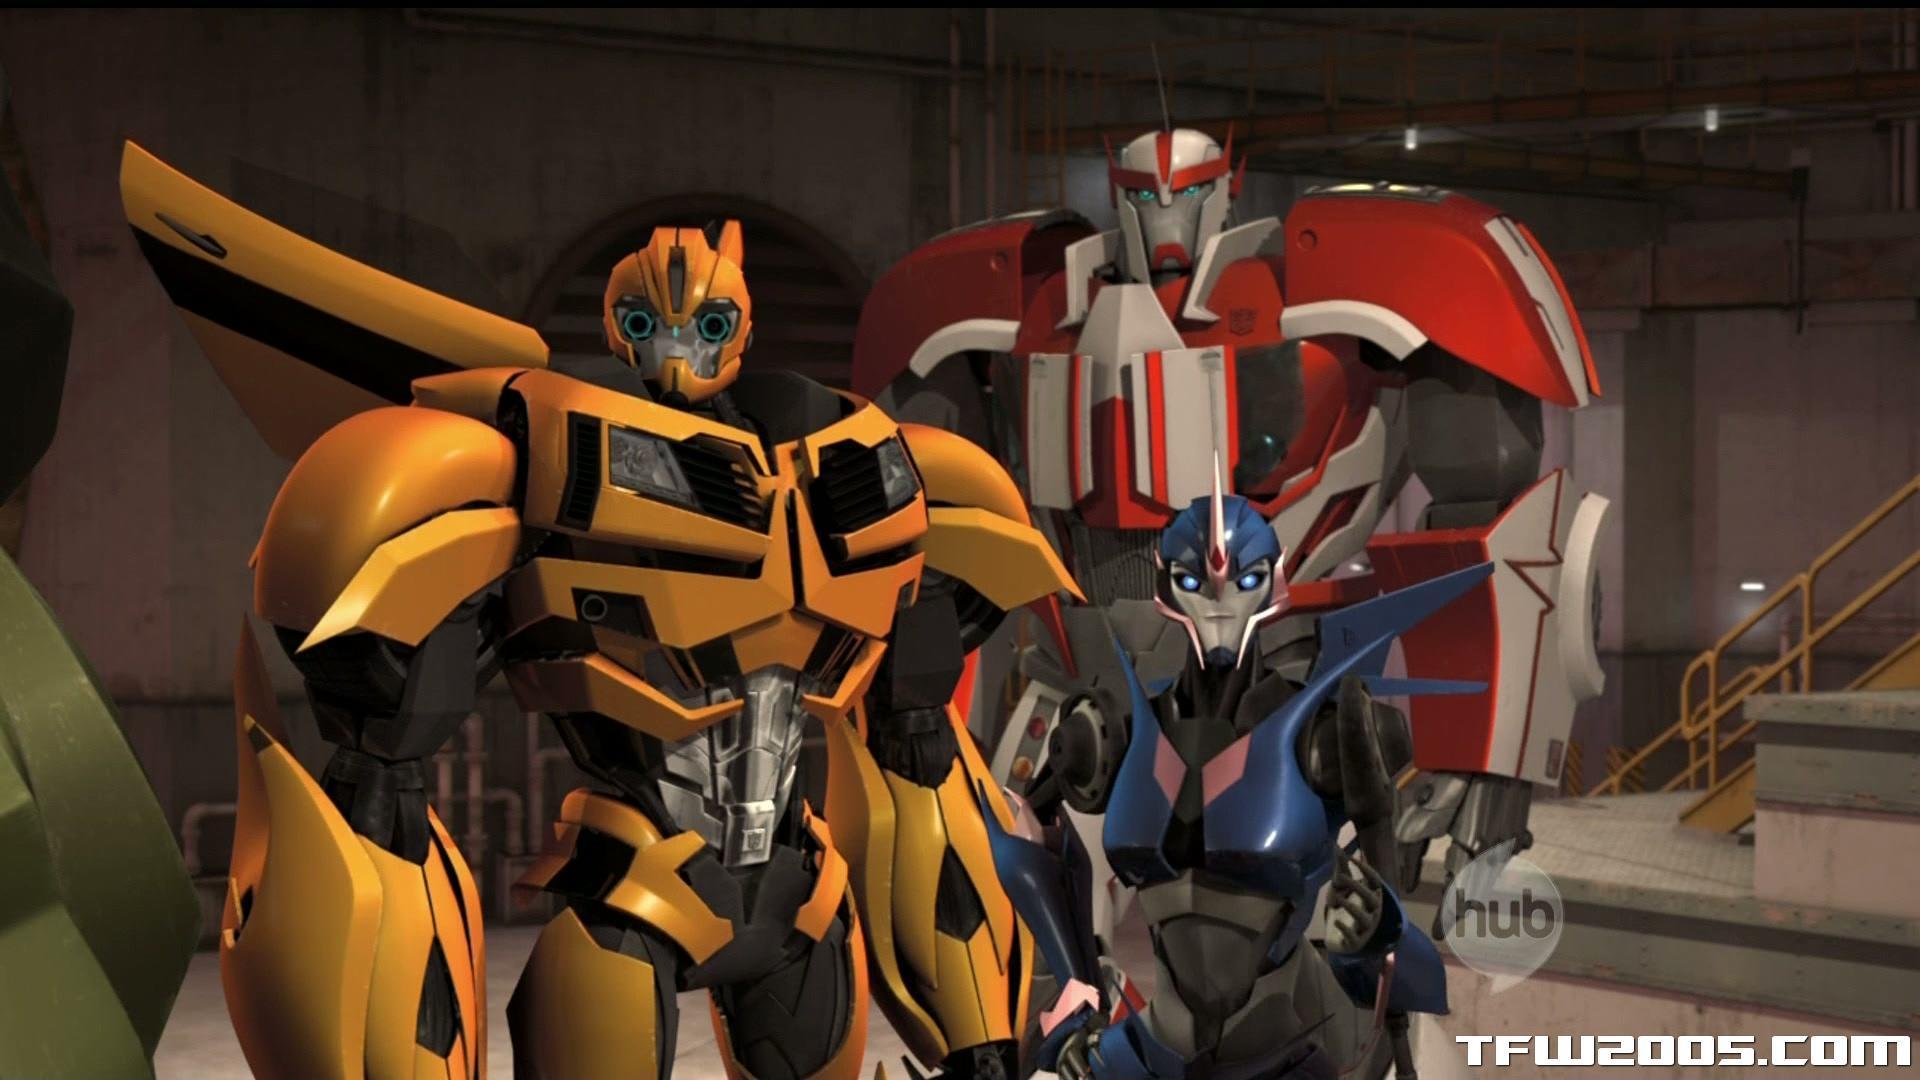 Transformers: Prime the animated series - Transformers Prime Image